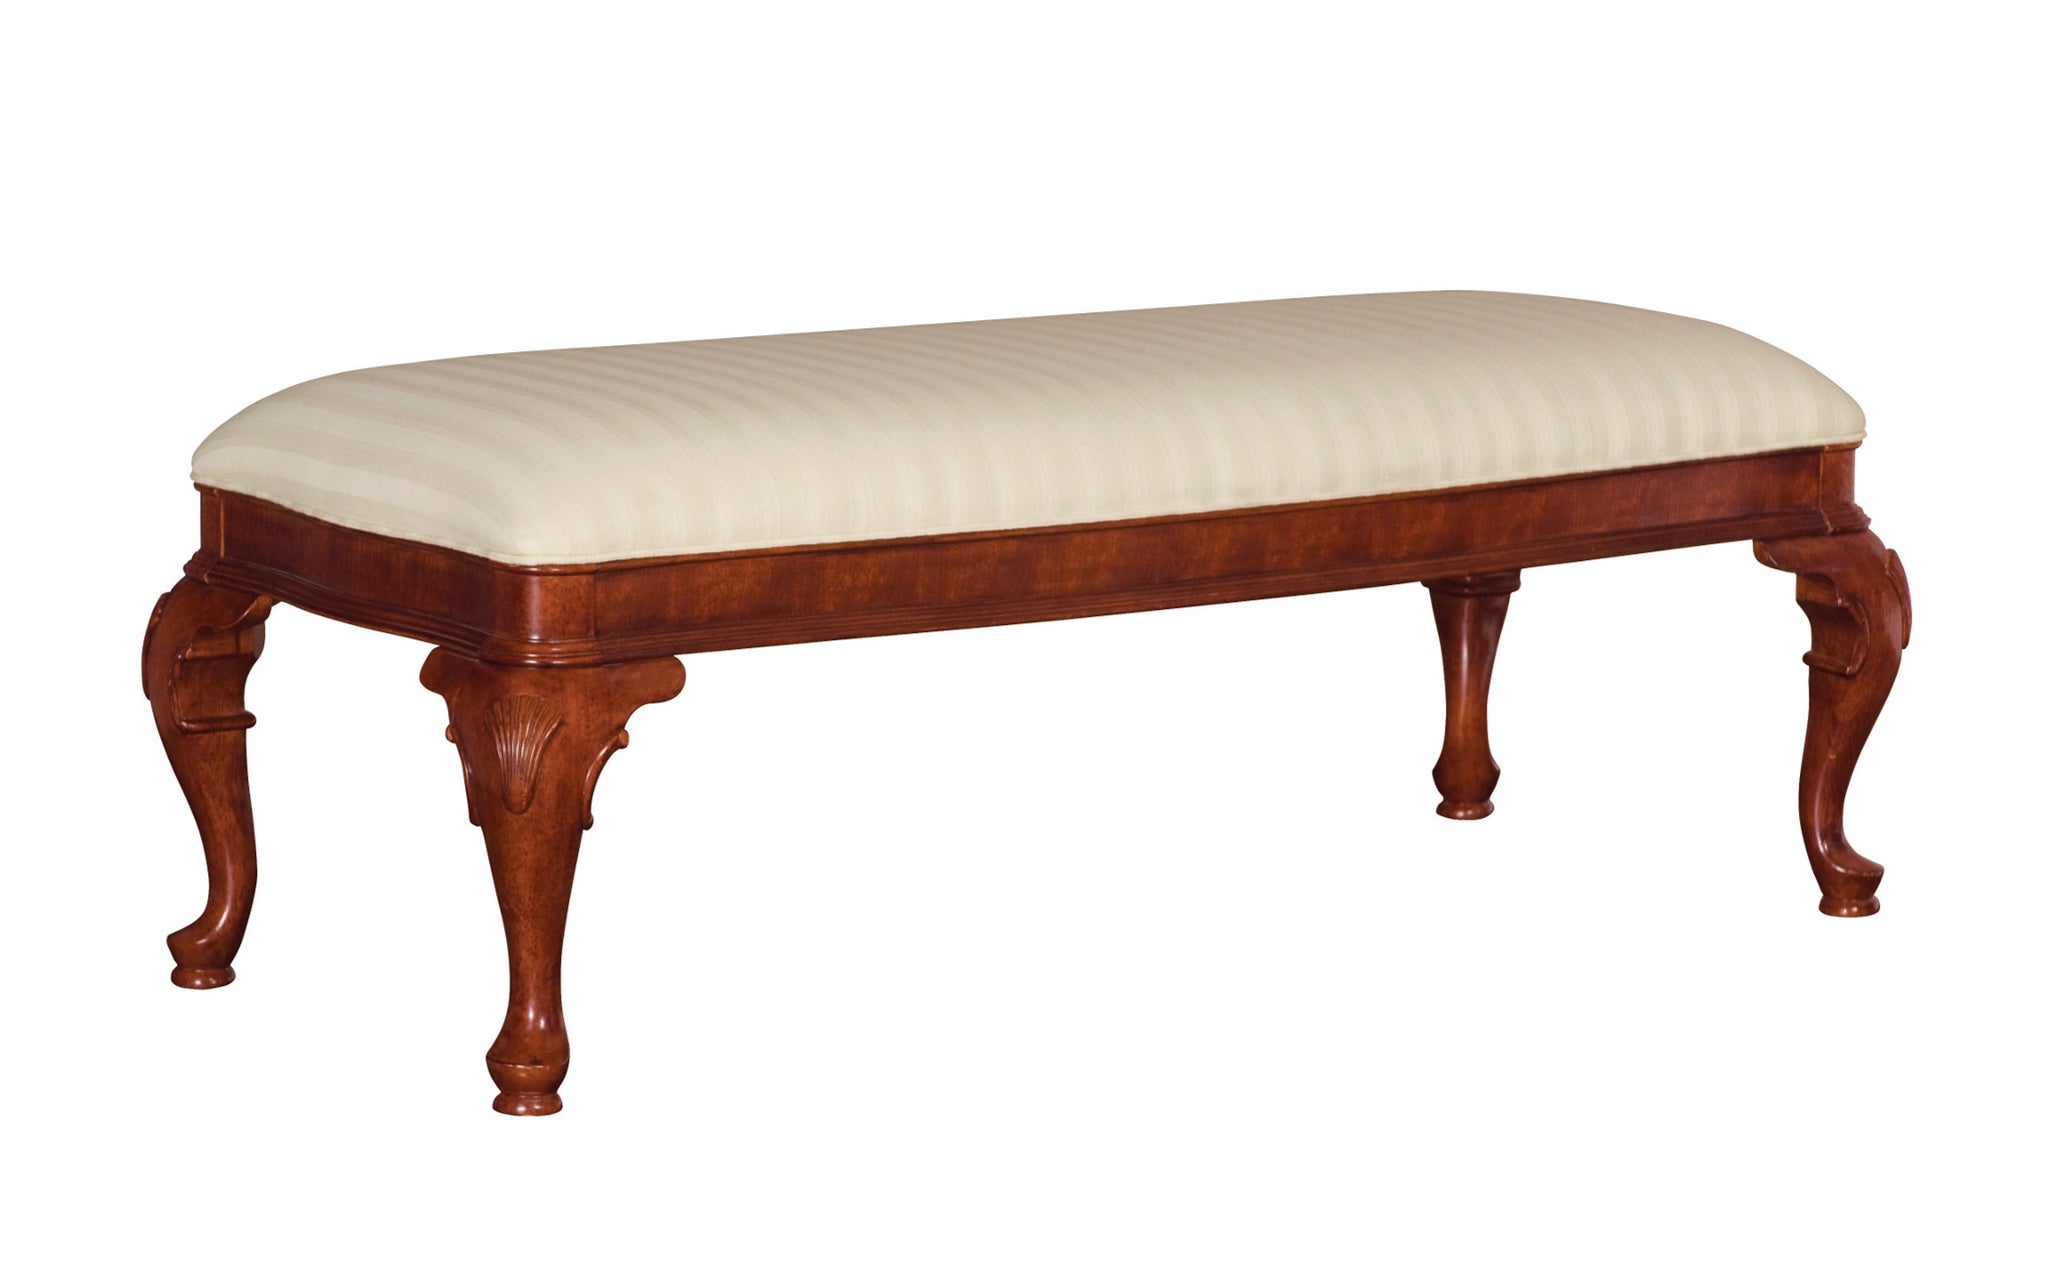 BED BENCH